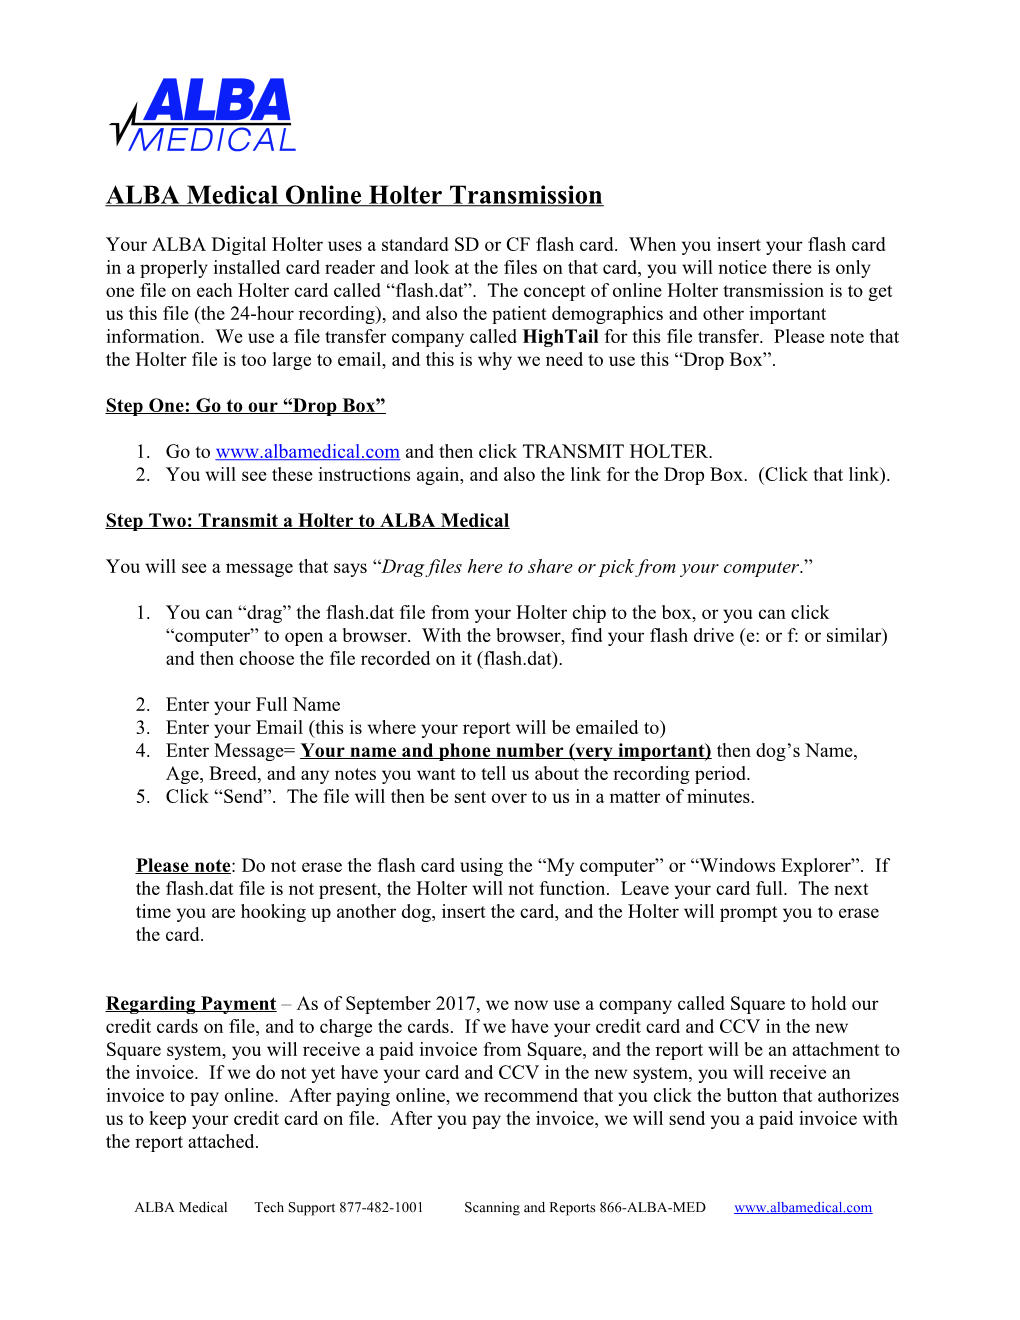 Sending a Holter Study to ALBA Medical